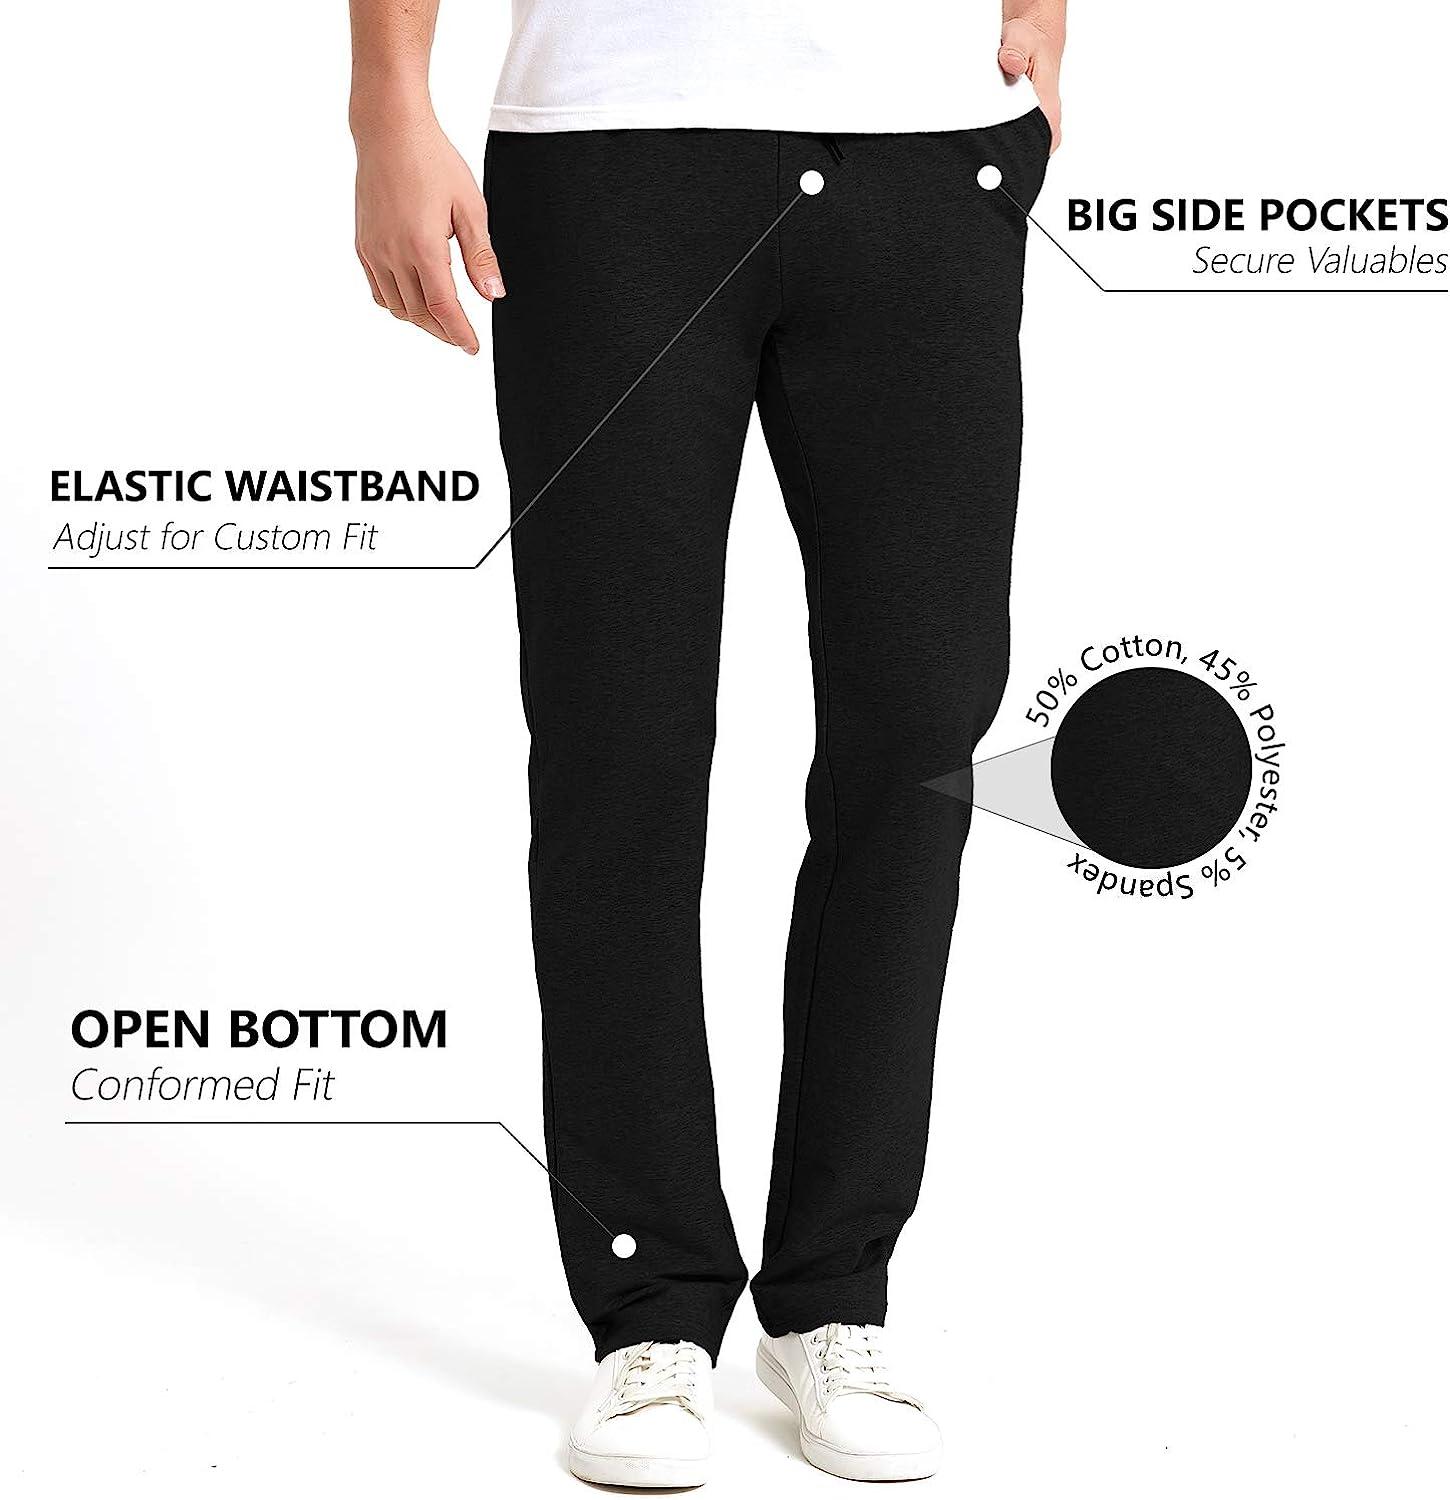  Idtswch 40 Inseam Mens Tall Sweatpants Extra Long